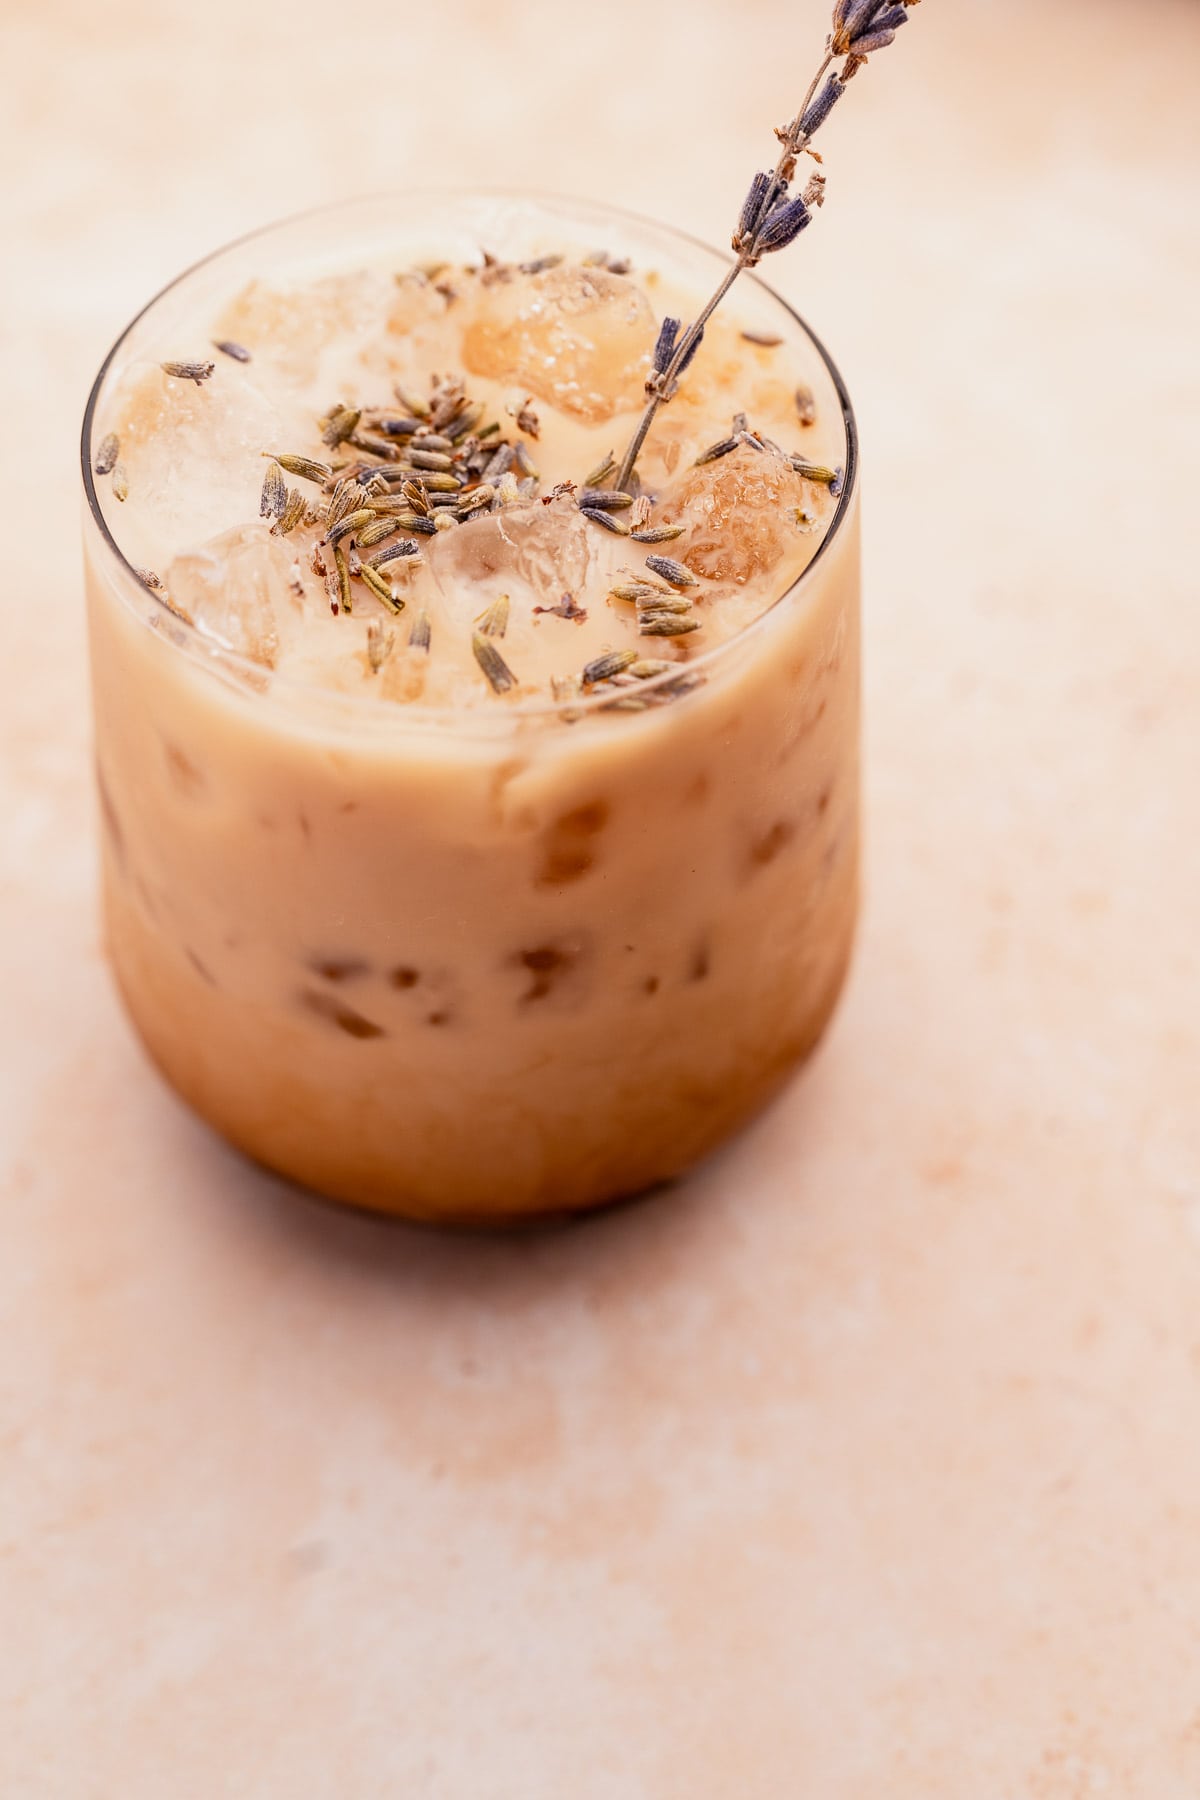 Iced Lavender Oatmilk Latte garnished with a sprig of lavender on a neutral background.